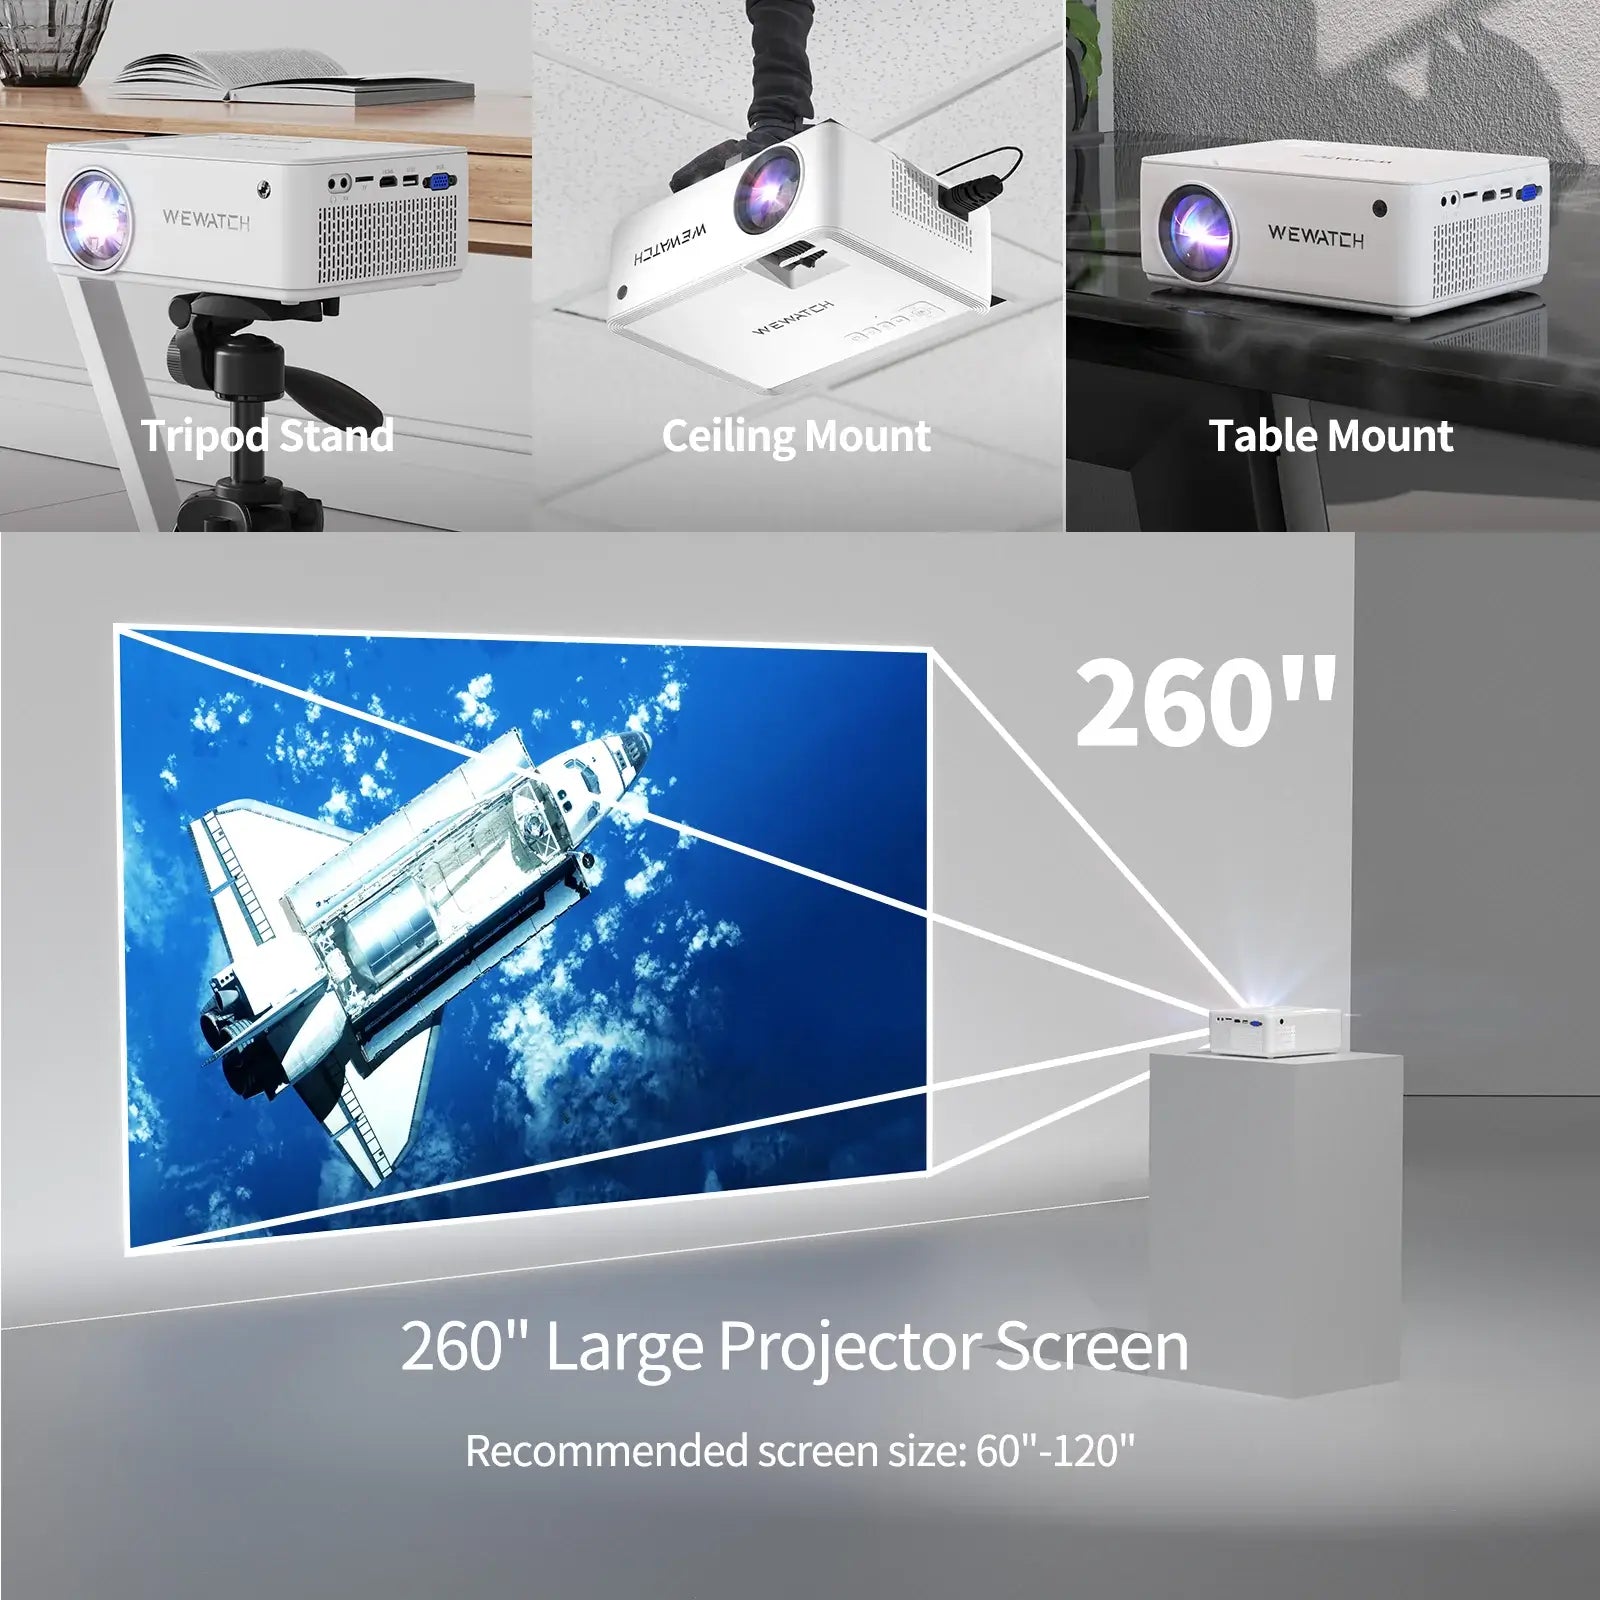 260_large-projector-screen